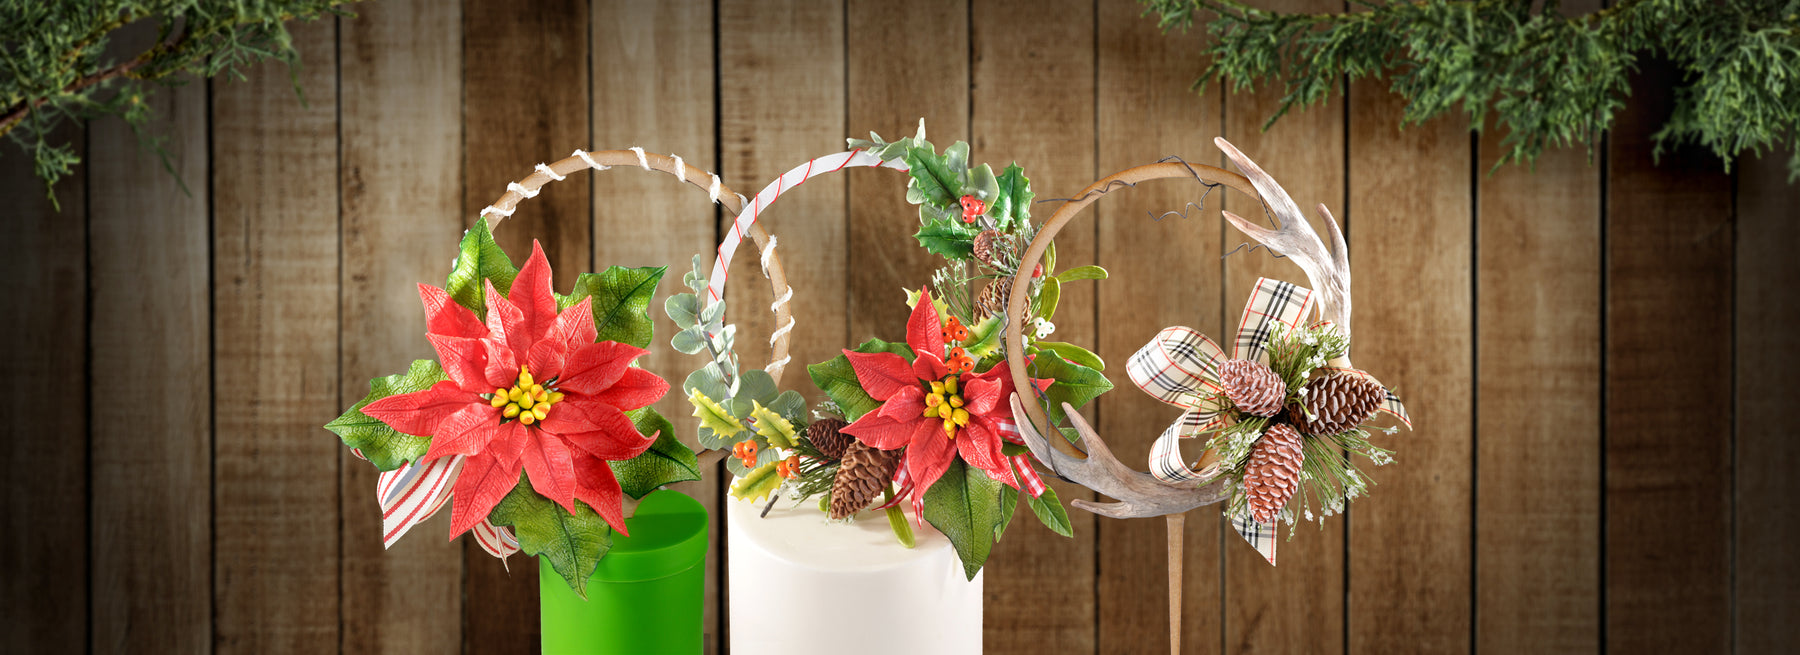 Learn how to make Christmas cake toppers